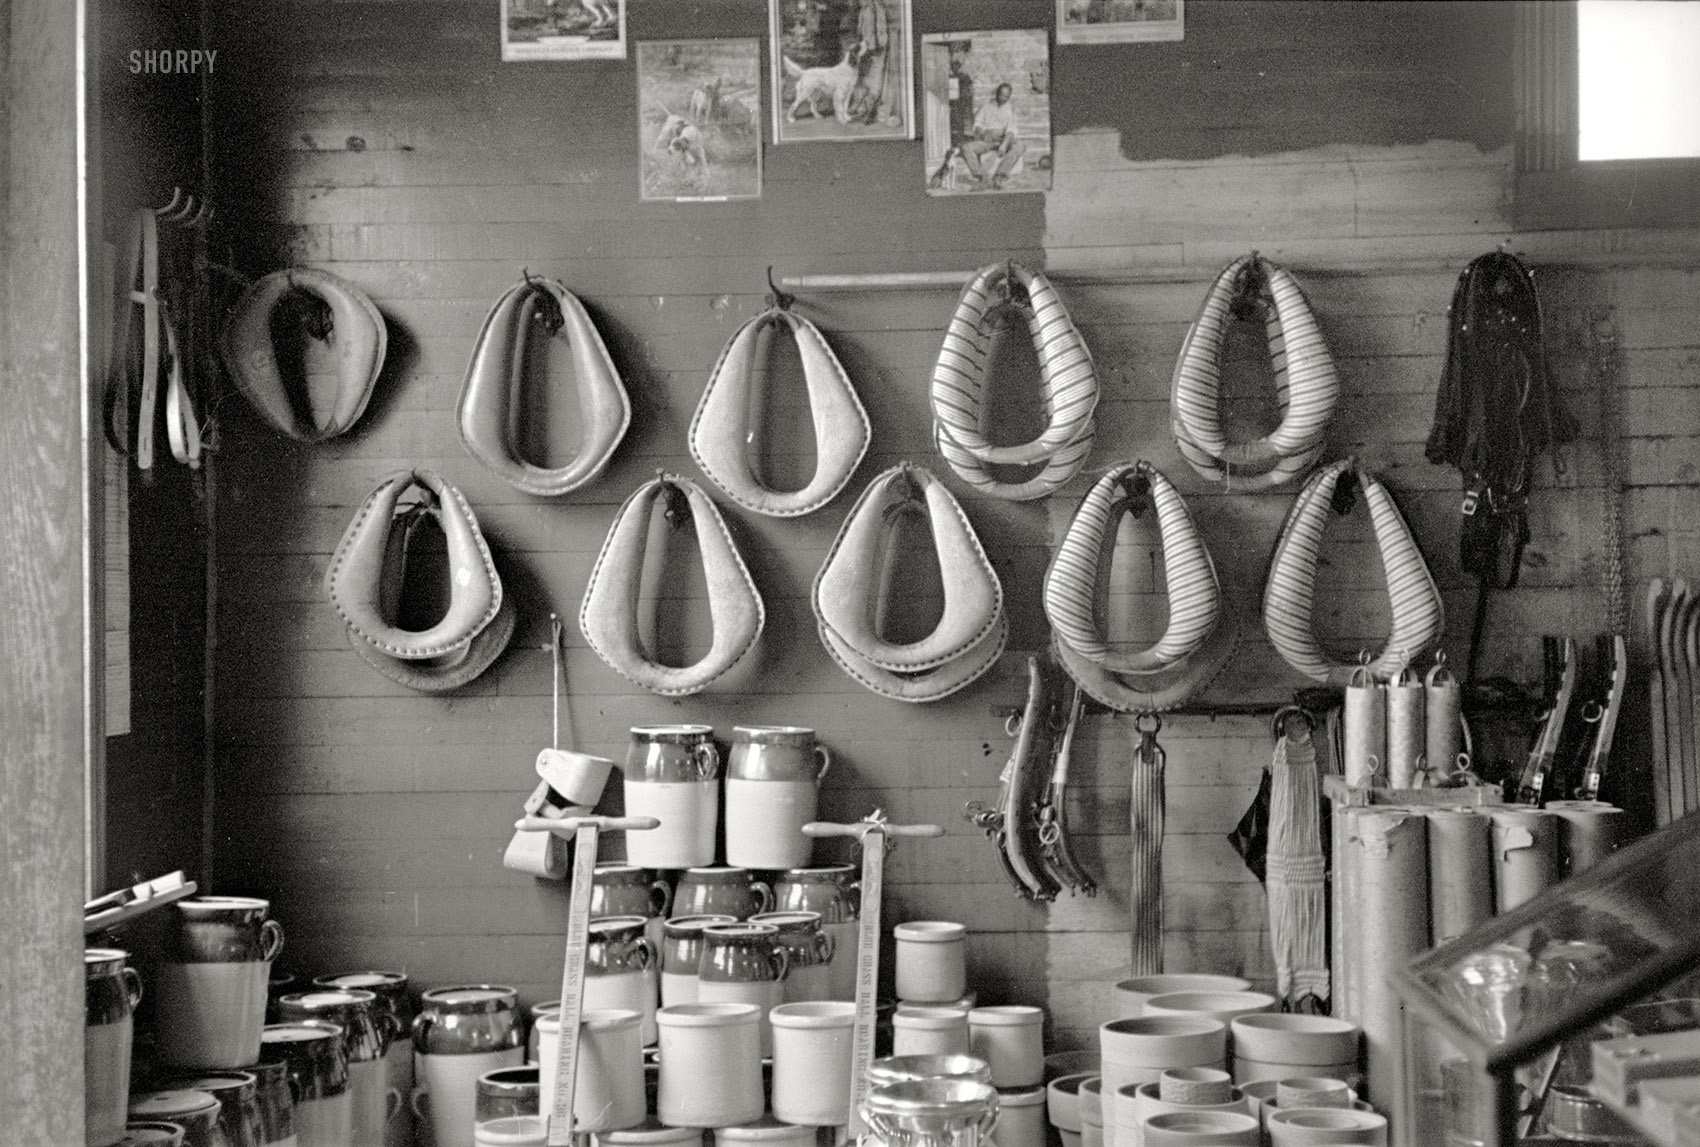 March 1936. "Tennessee harness and hardware store." 35mm nitrate negative by Carl Mydans for the Farm Security Administration. View full size.